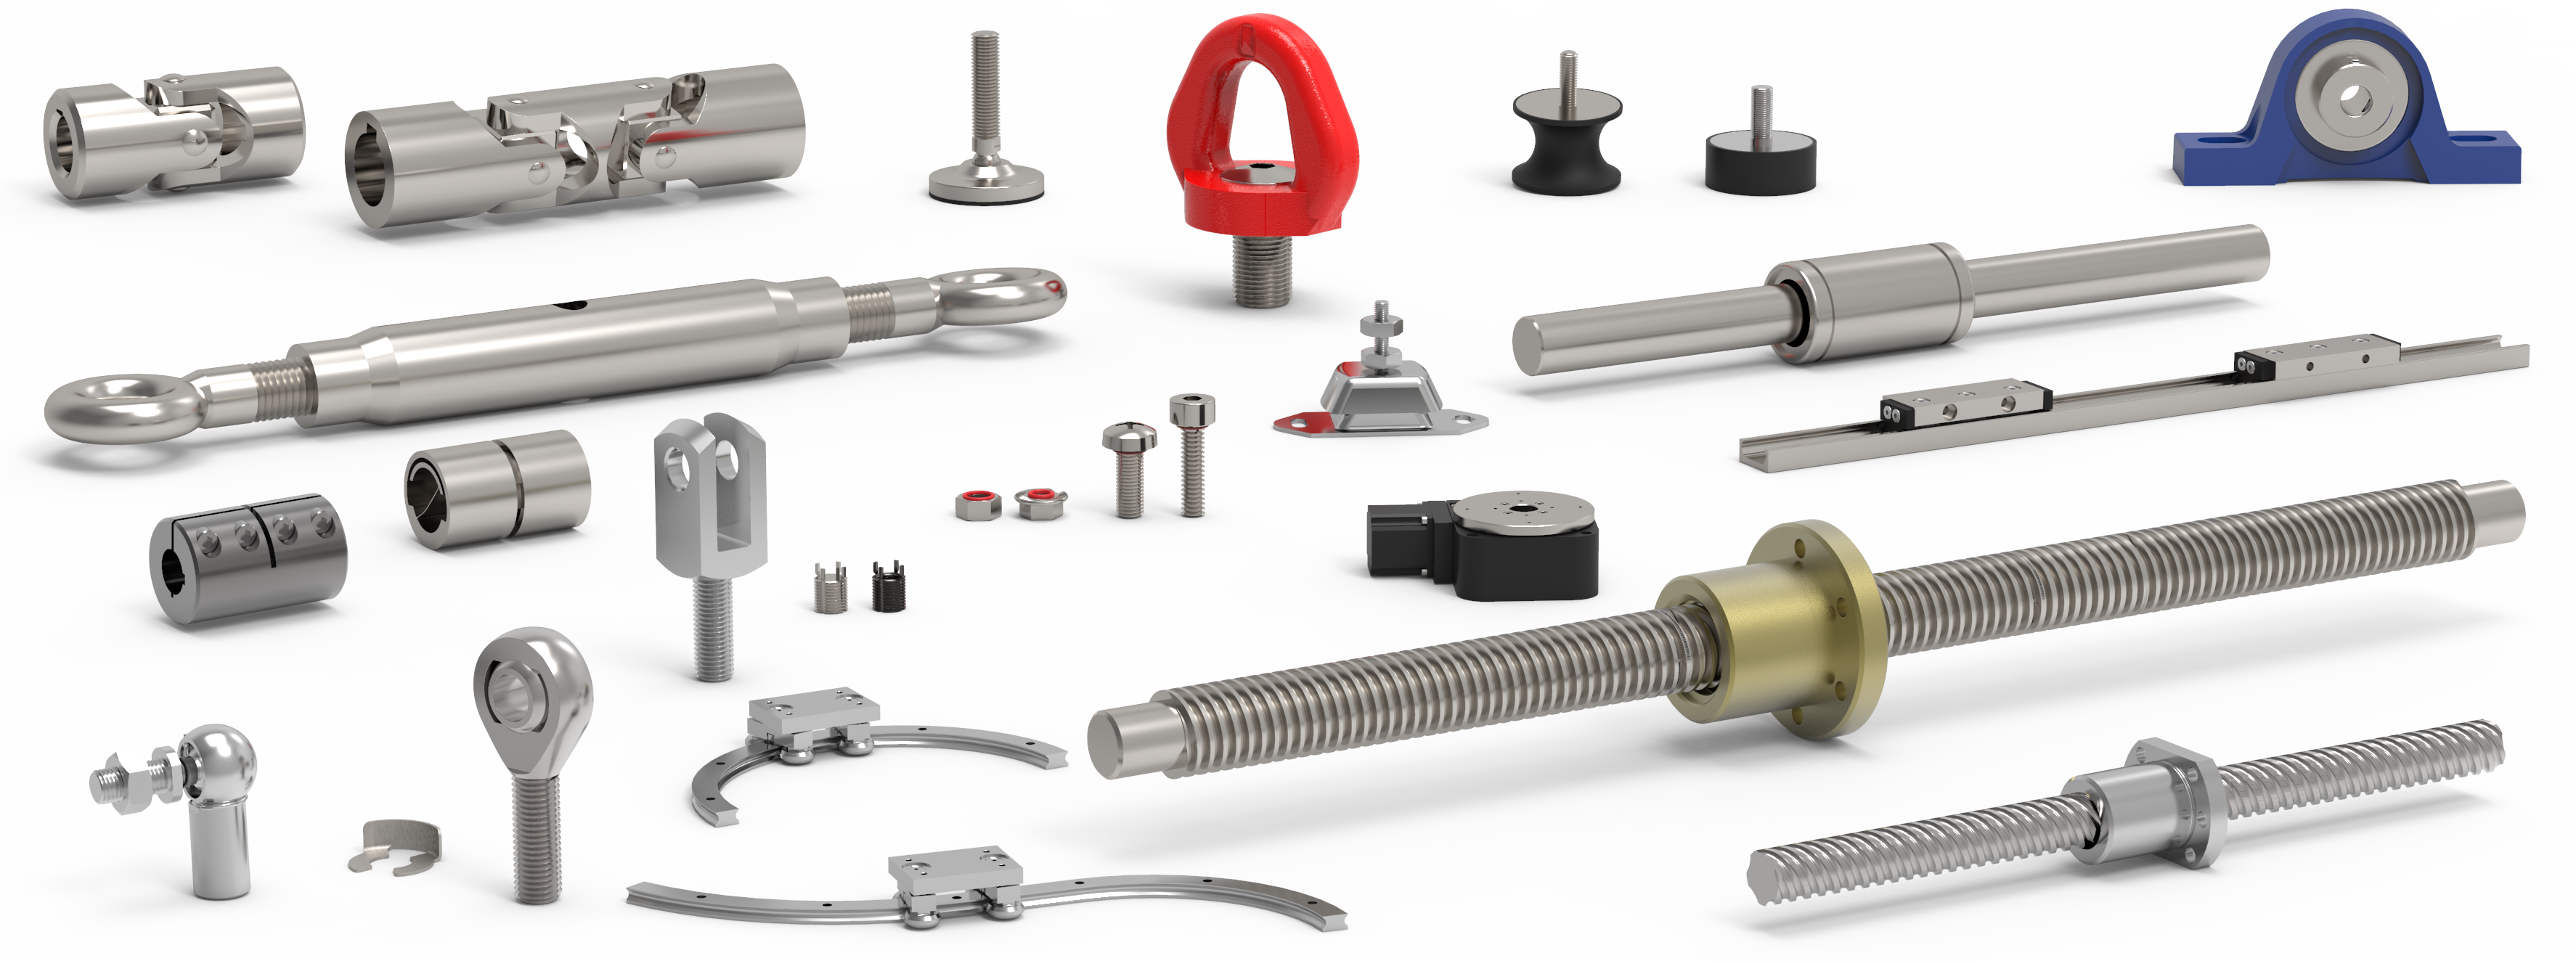 Clevis Pins From Automotion